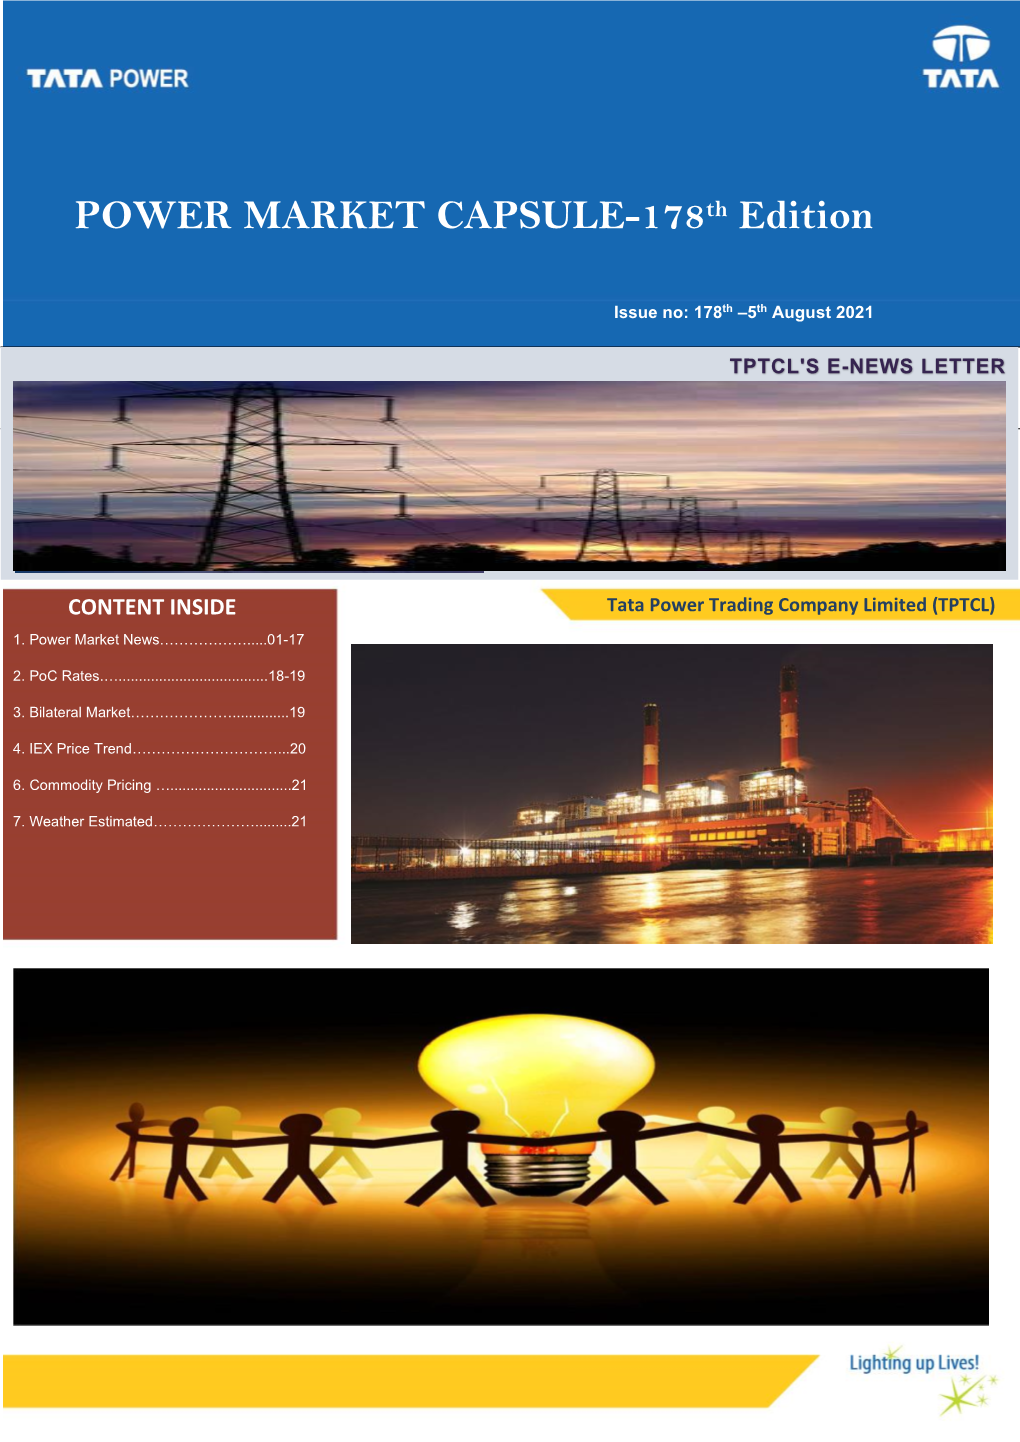 POWER MARKET CAPSULE-178Th Edition